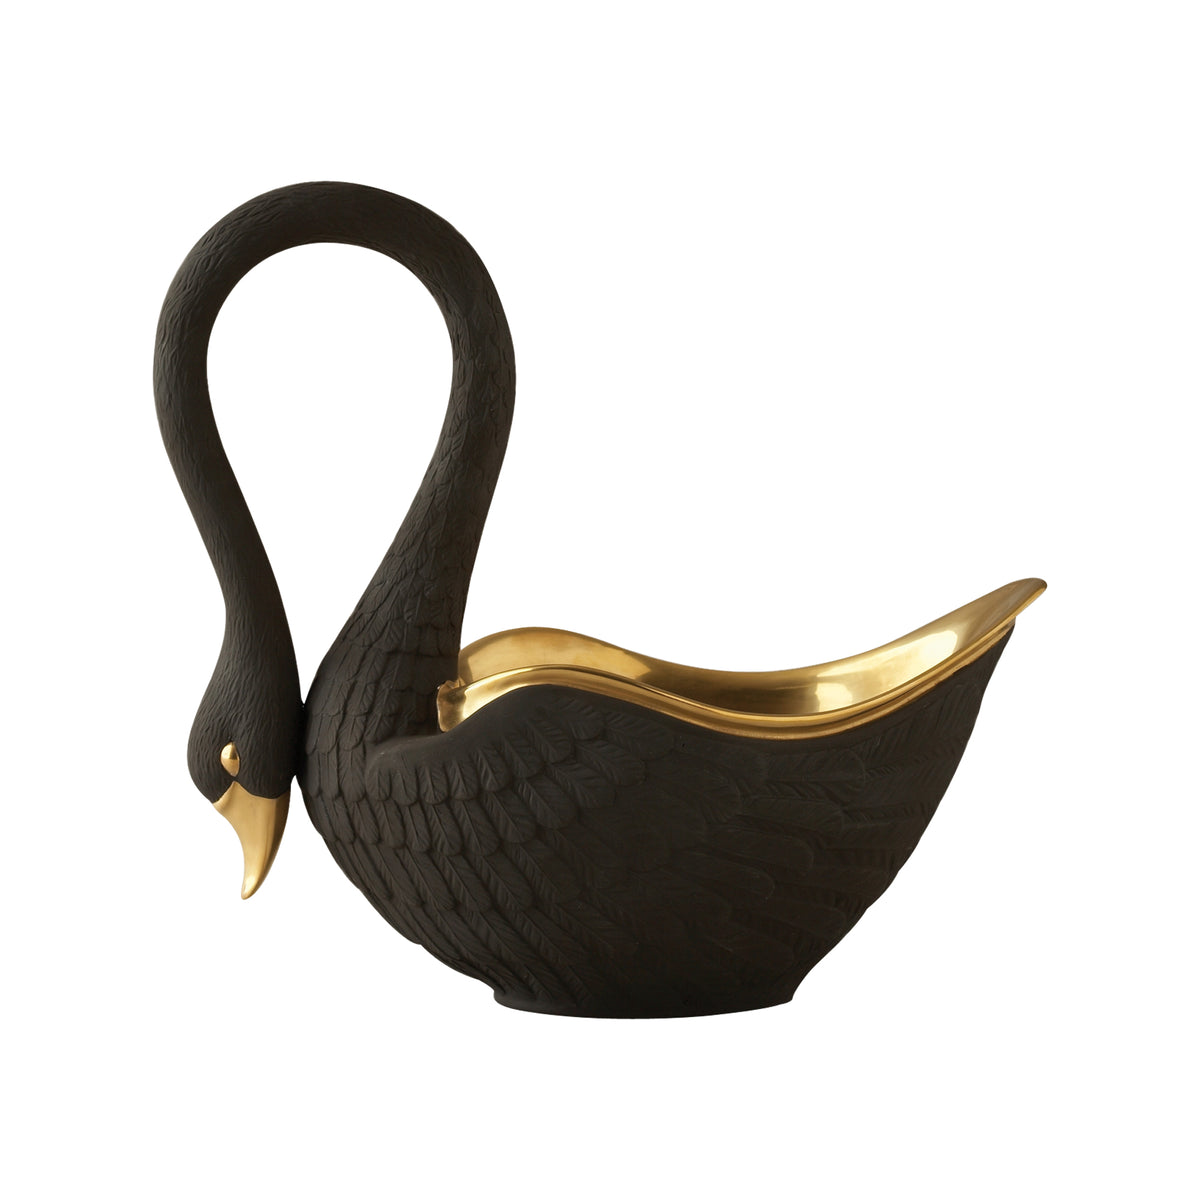 Grand Black Swan Bowl with 24K Gold